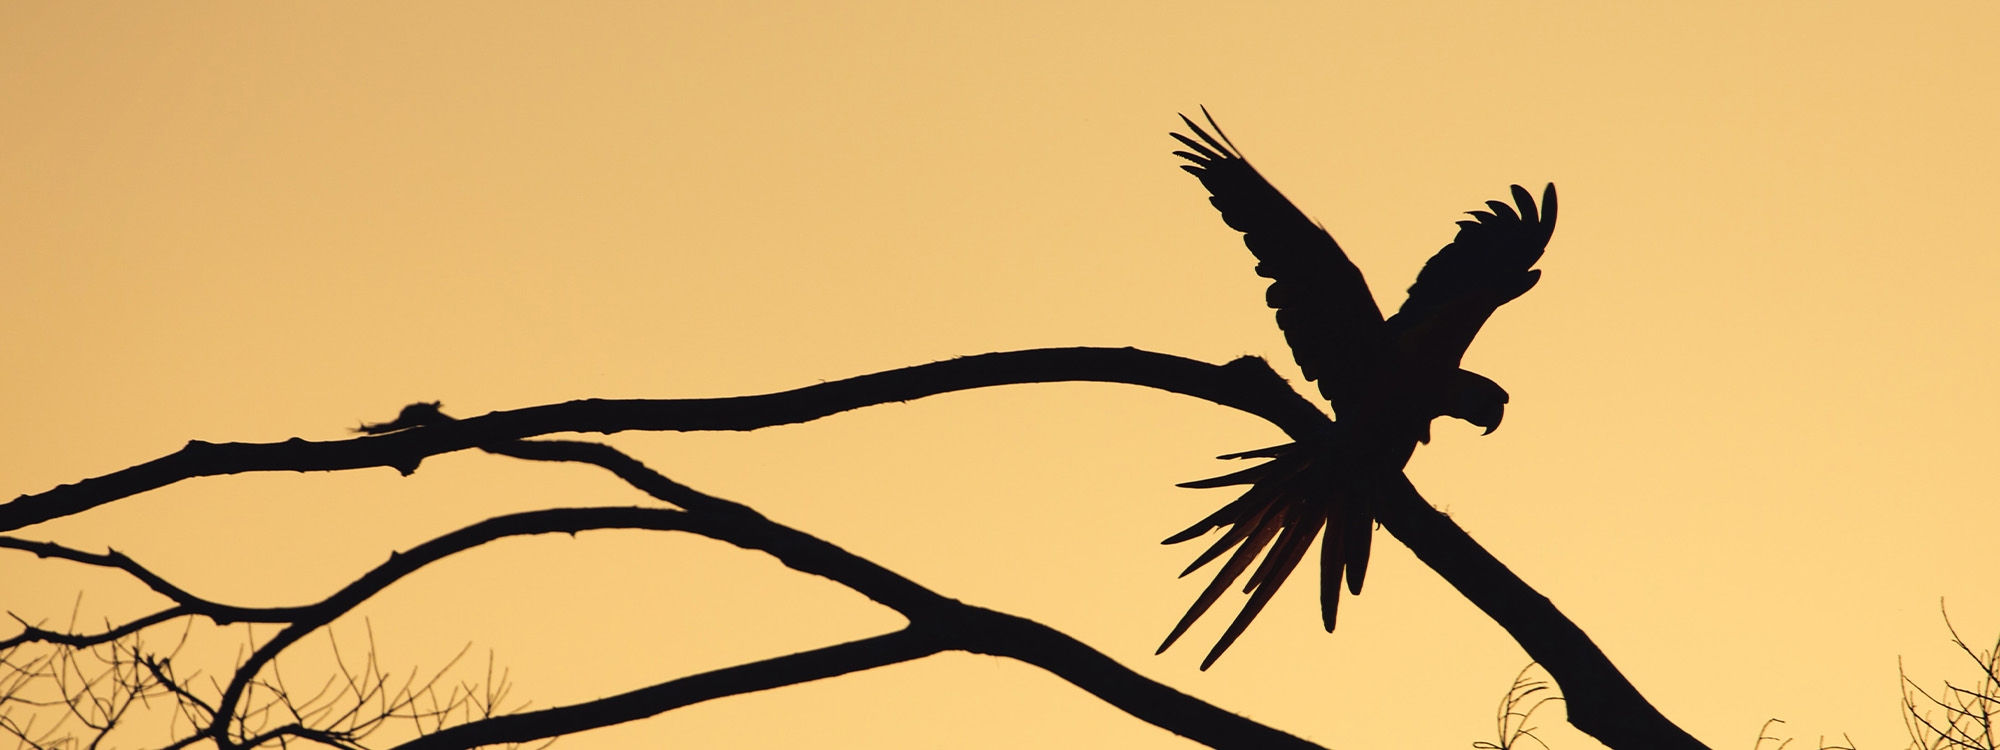 Silhouette of a bird resting on a branch